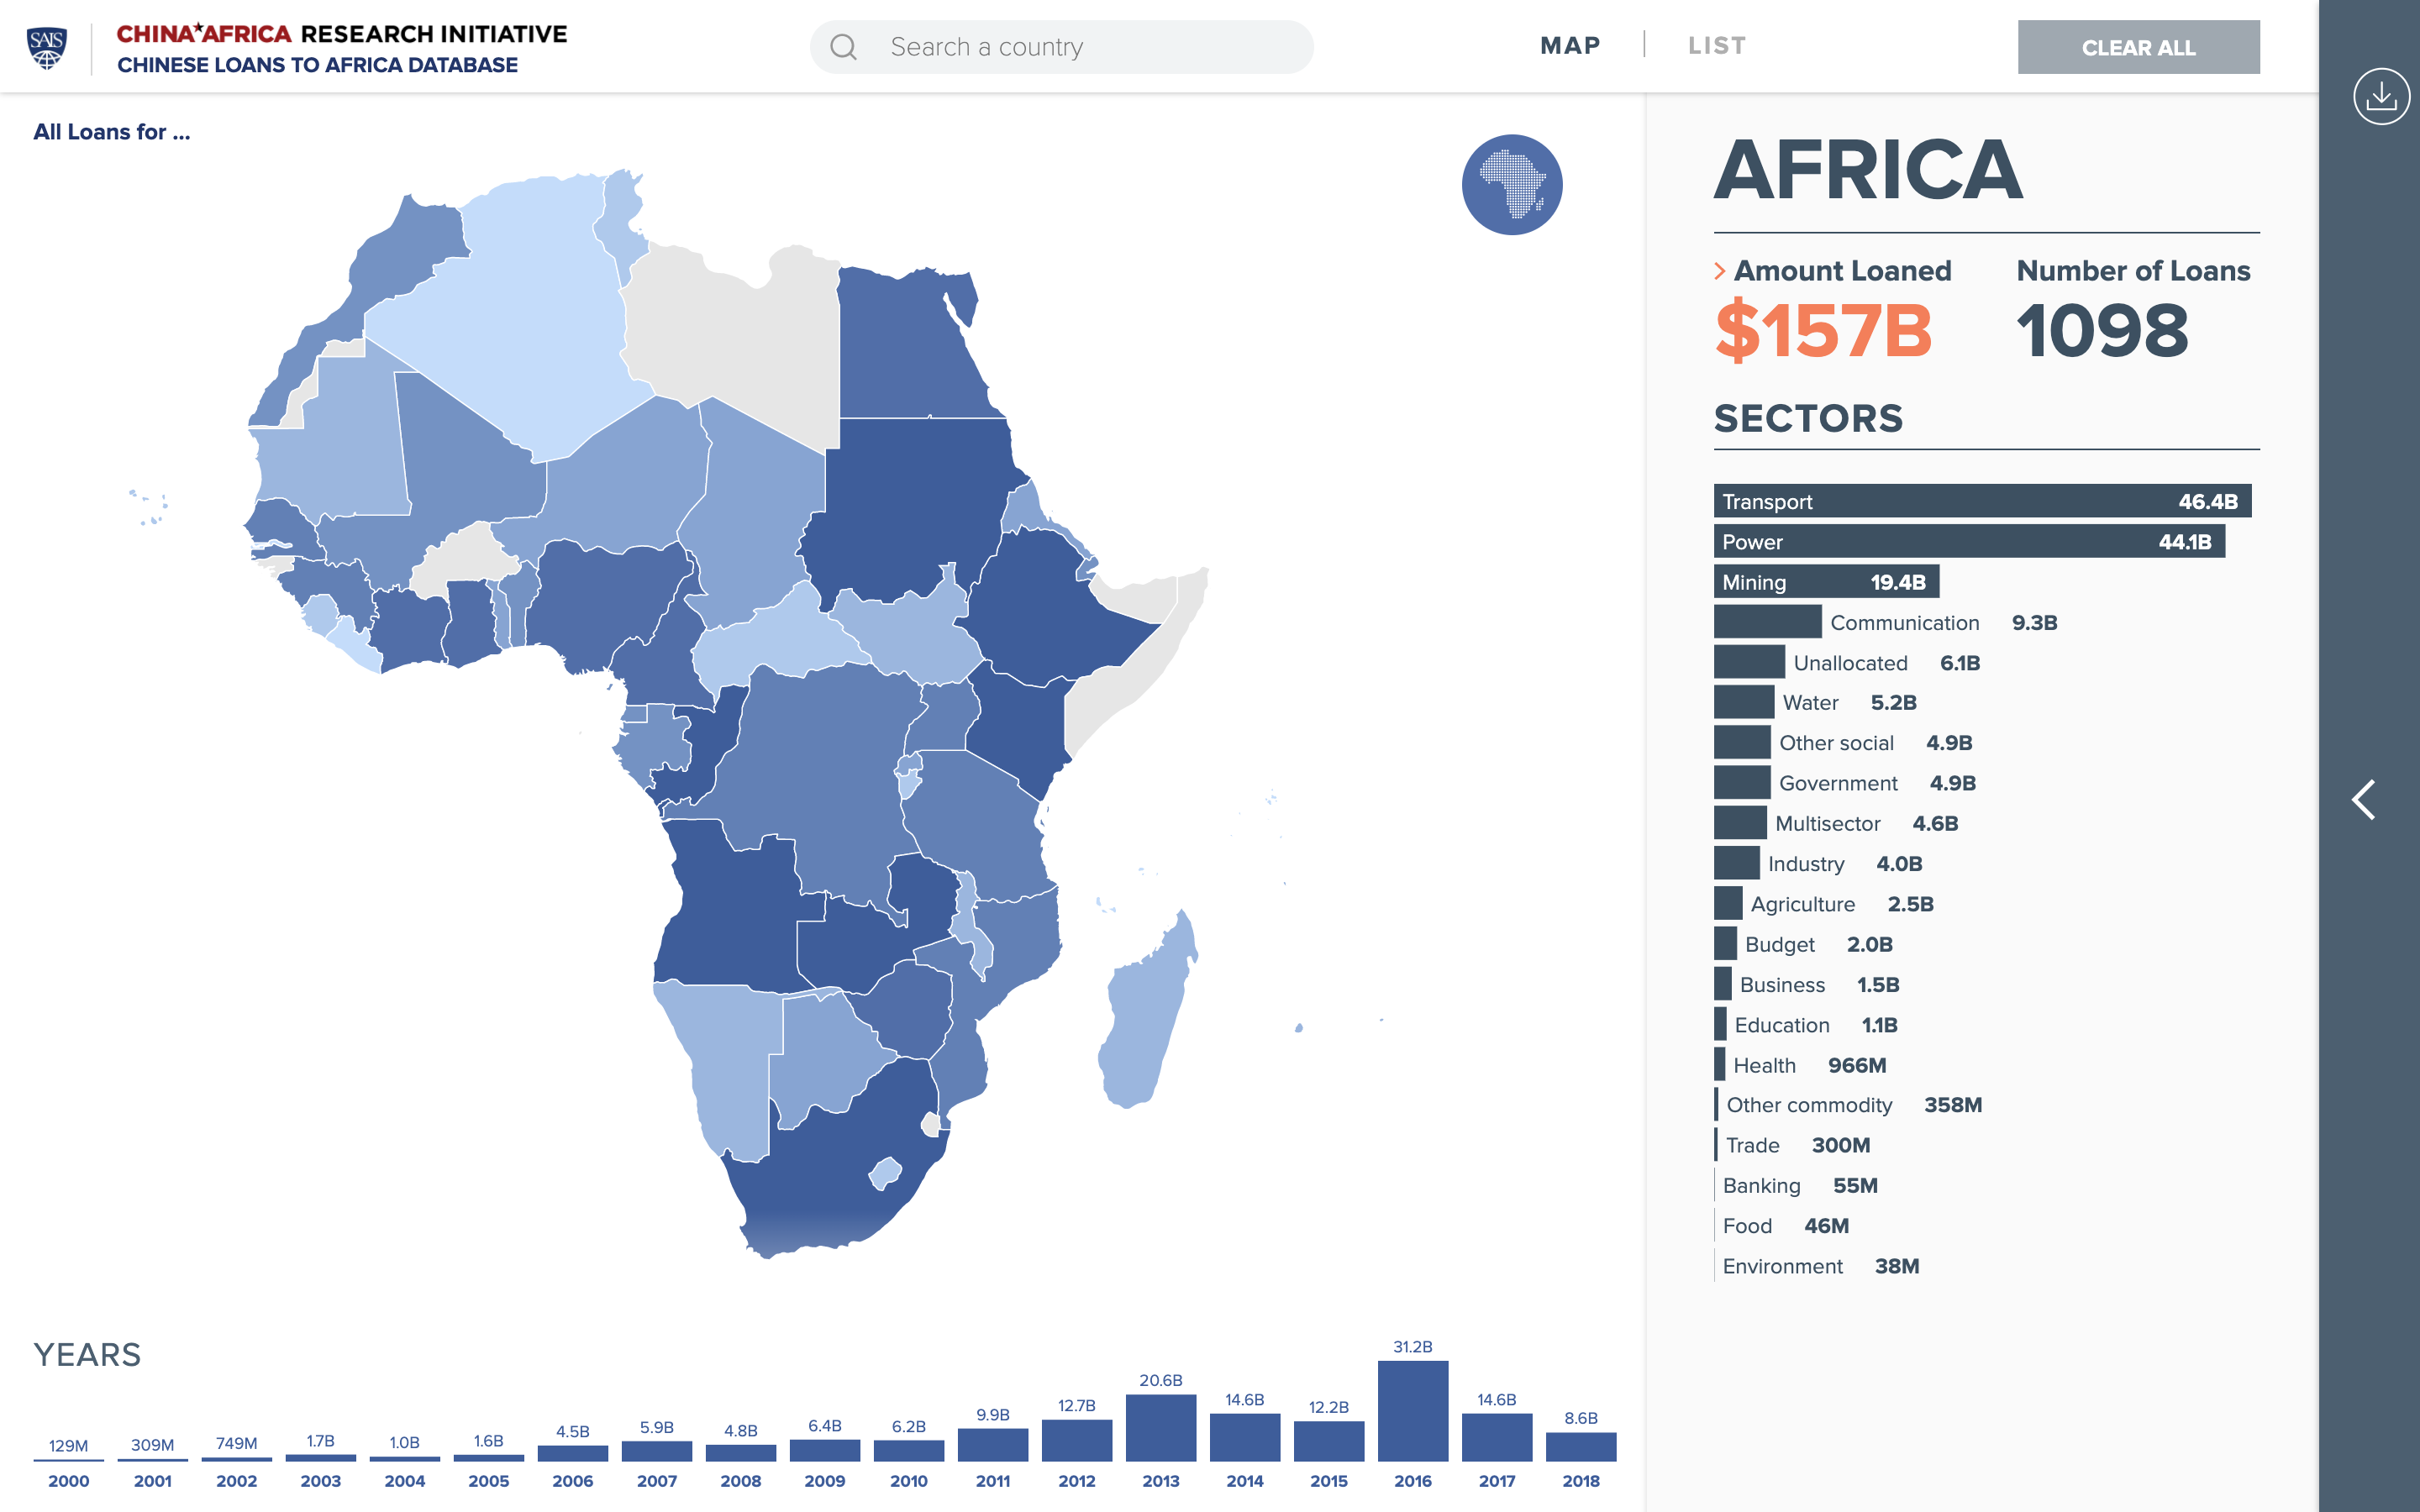 Chinese Loans to Africa Database- Map View